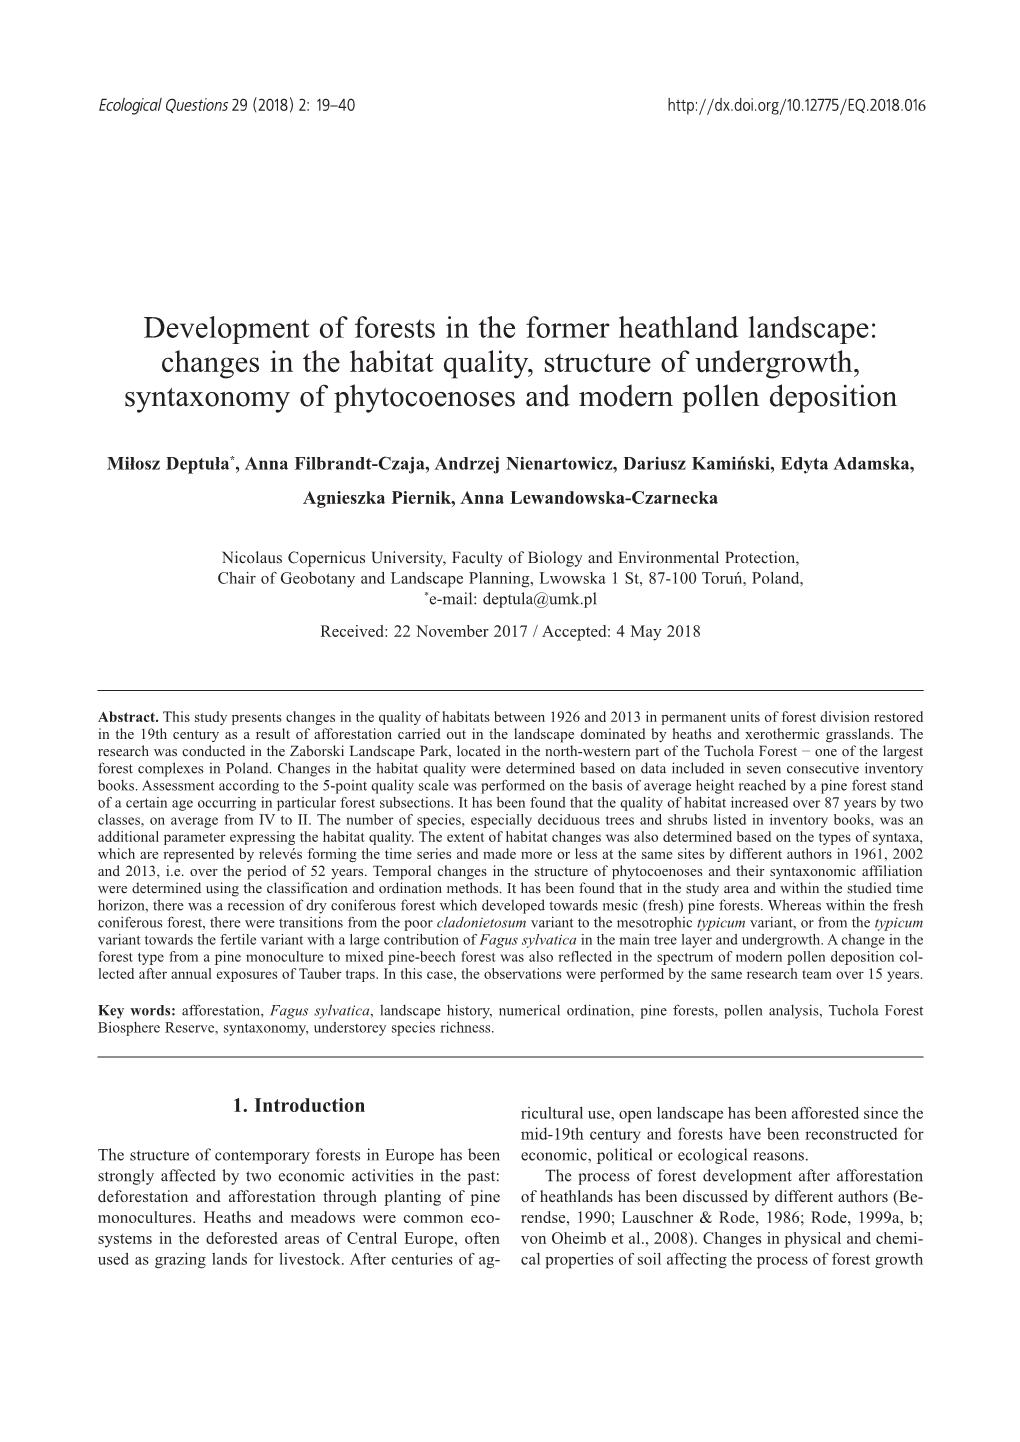 Development of Forests in the Former Heathland Landscape: Changes in the Habitat Quality, Structure of Undergrowth, Syntaxonomy